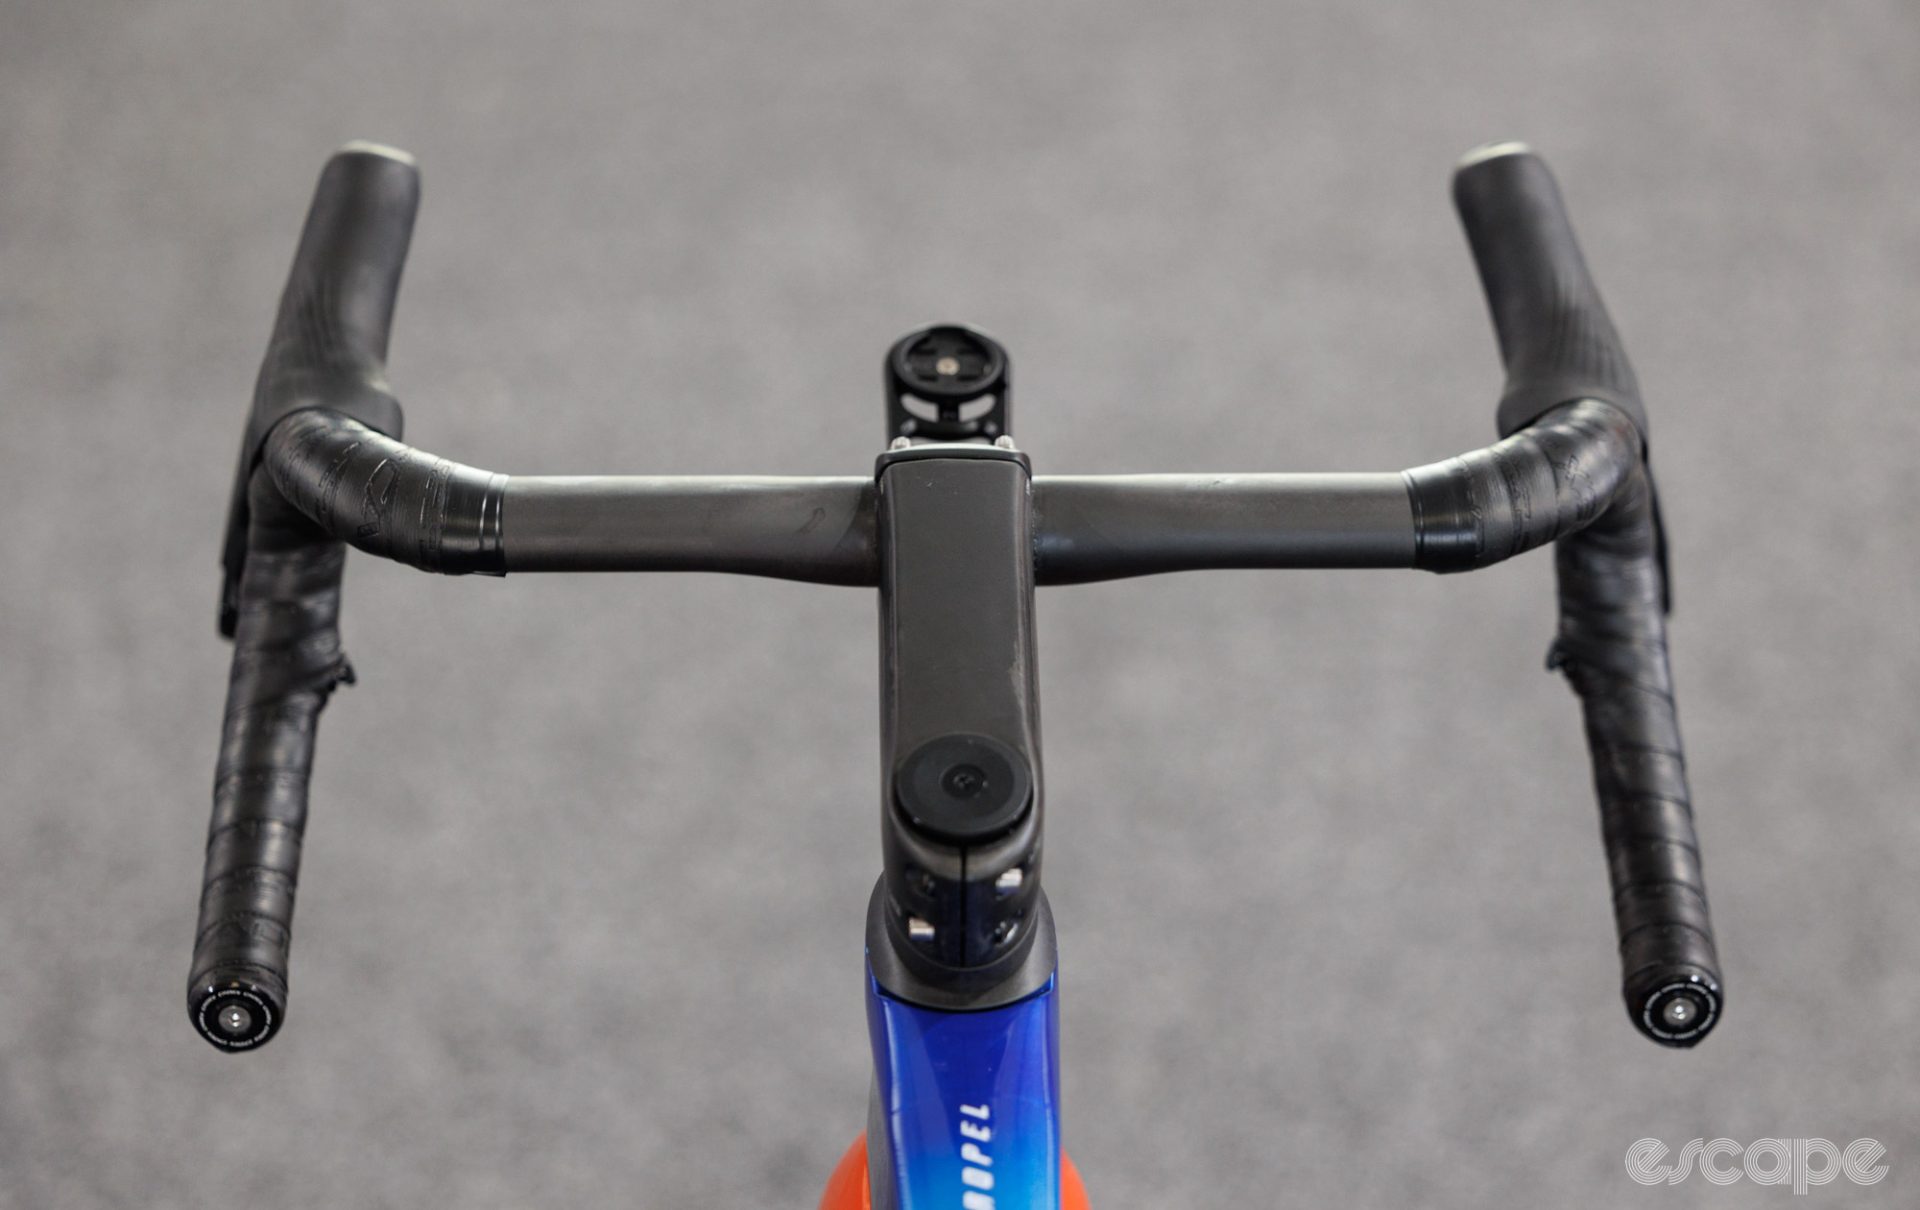 The Propel cockpit features an integrated, two-piece bar stem with a blocky looking stem. As is custom, brake levers are pointed in slightly.